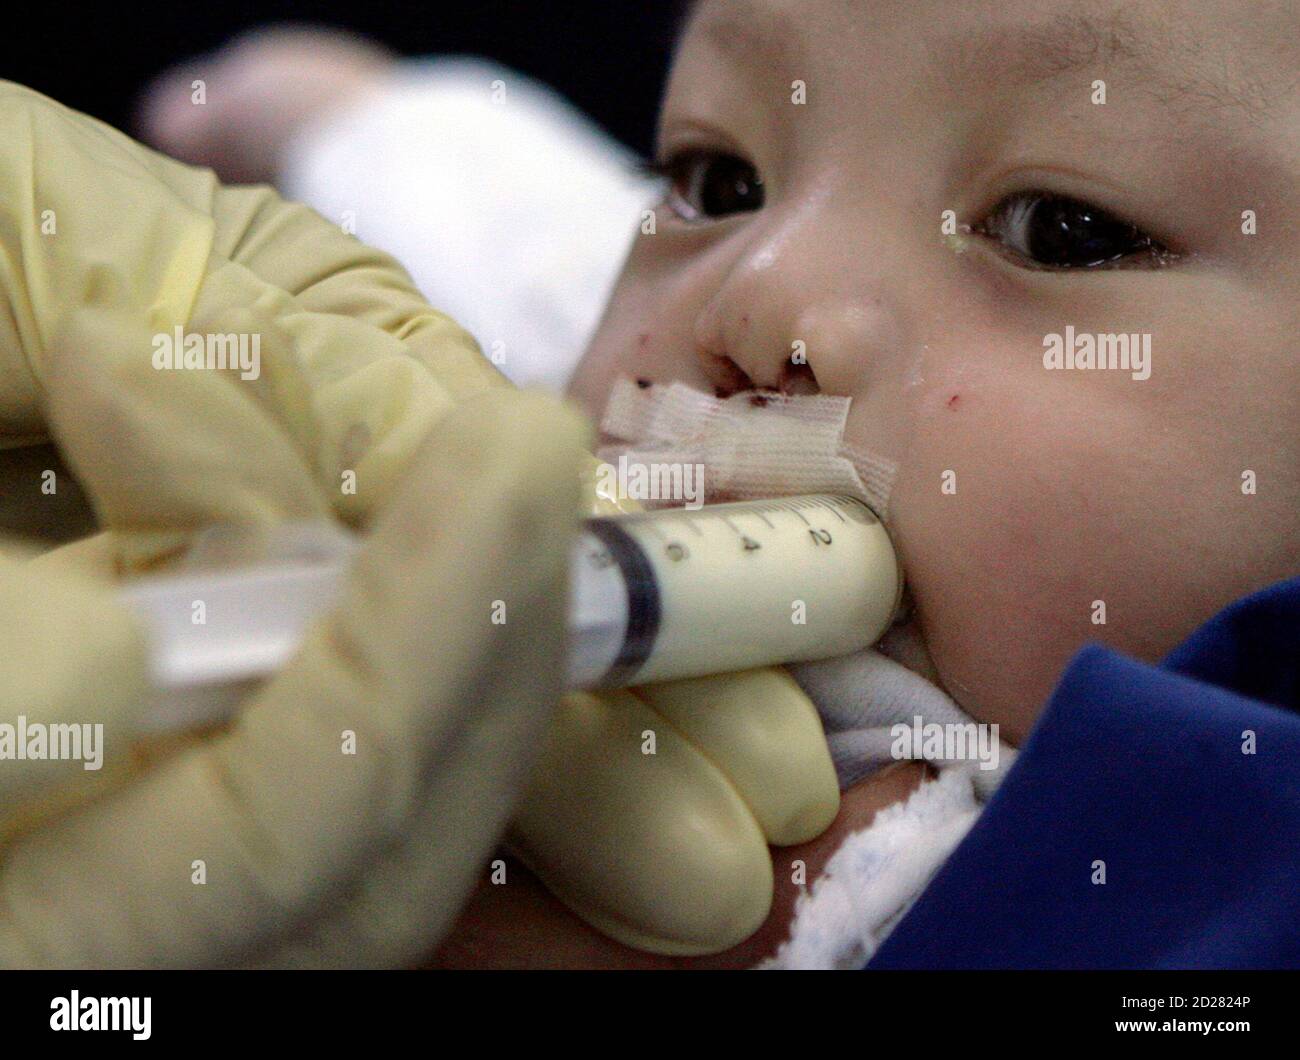 A baby boy, inflicted with a cleft lip, tries to drink his milk from a syringe after his surgery during 'Operation Restore Hope' at Diosdado Macapagal Memorial Medical Center in Caloocan City, Metro Manila April 12, 2010. Operation Restore Hope, a group of medical volunteers from Germany, New Zealand and Australia who perform surgeries for underprivileged children every year, aim to provide free surgery for about 70-80 children inflicted with cleft lips, cleft palates, and other facial deformities over a period of five days. REUTERS/Cheryl Ravelo (PHILIPPINES - Tags: HEALTH SOCIETY) Stock Photo